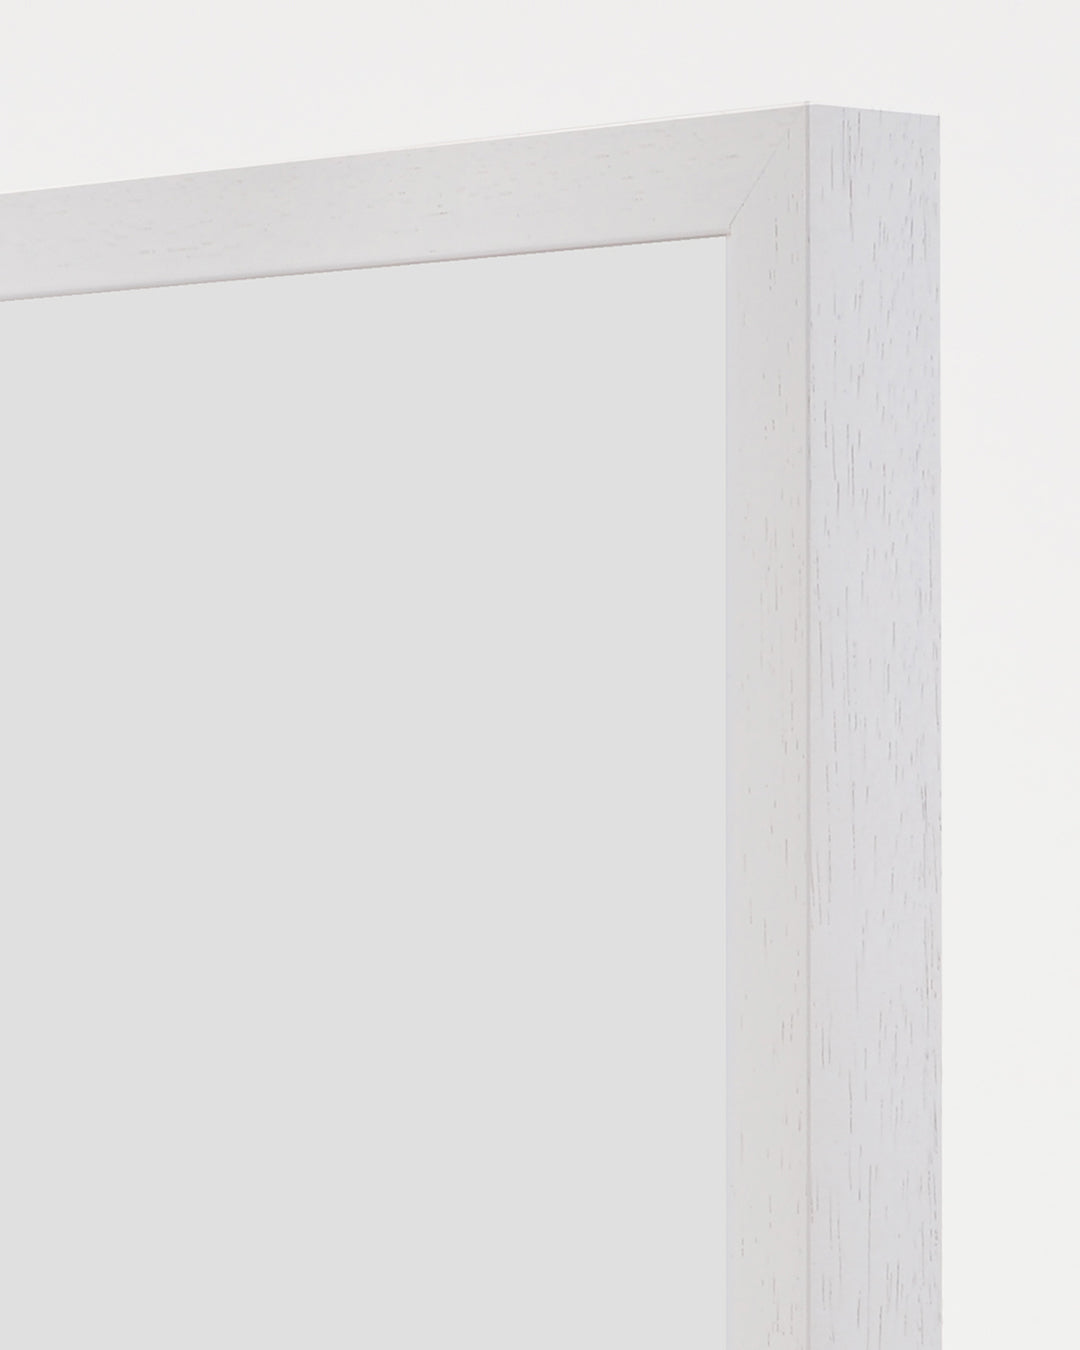 White Picture Frame (Wood Grain), A5 Size Photo Frame